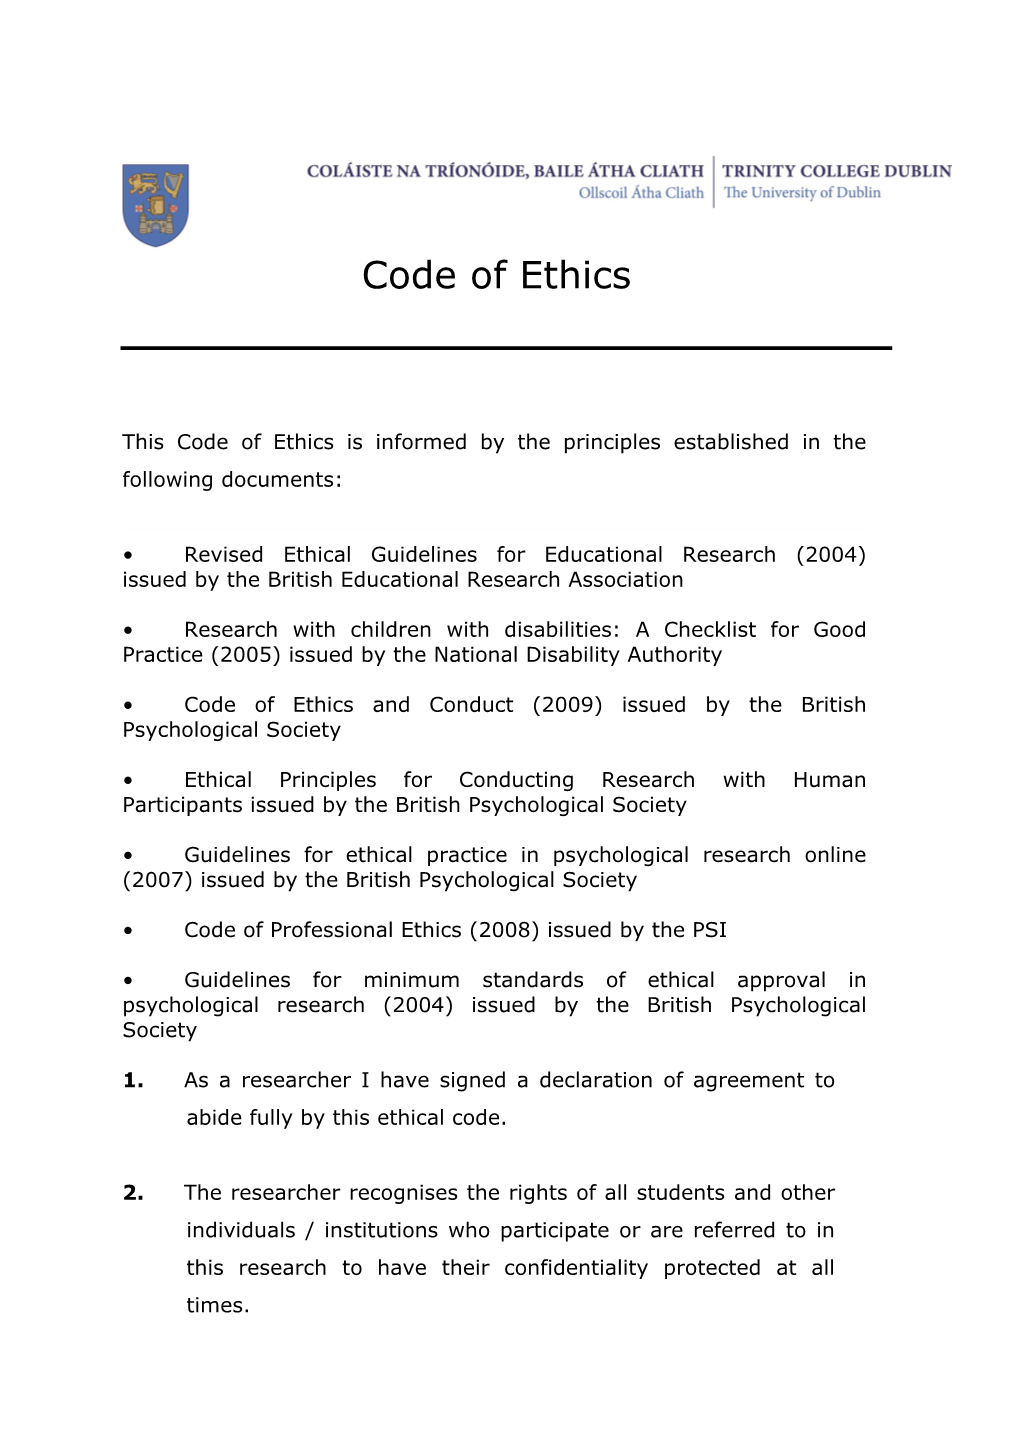 This Code of Ethics Is Informed by the Principles Established in the Following Documents